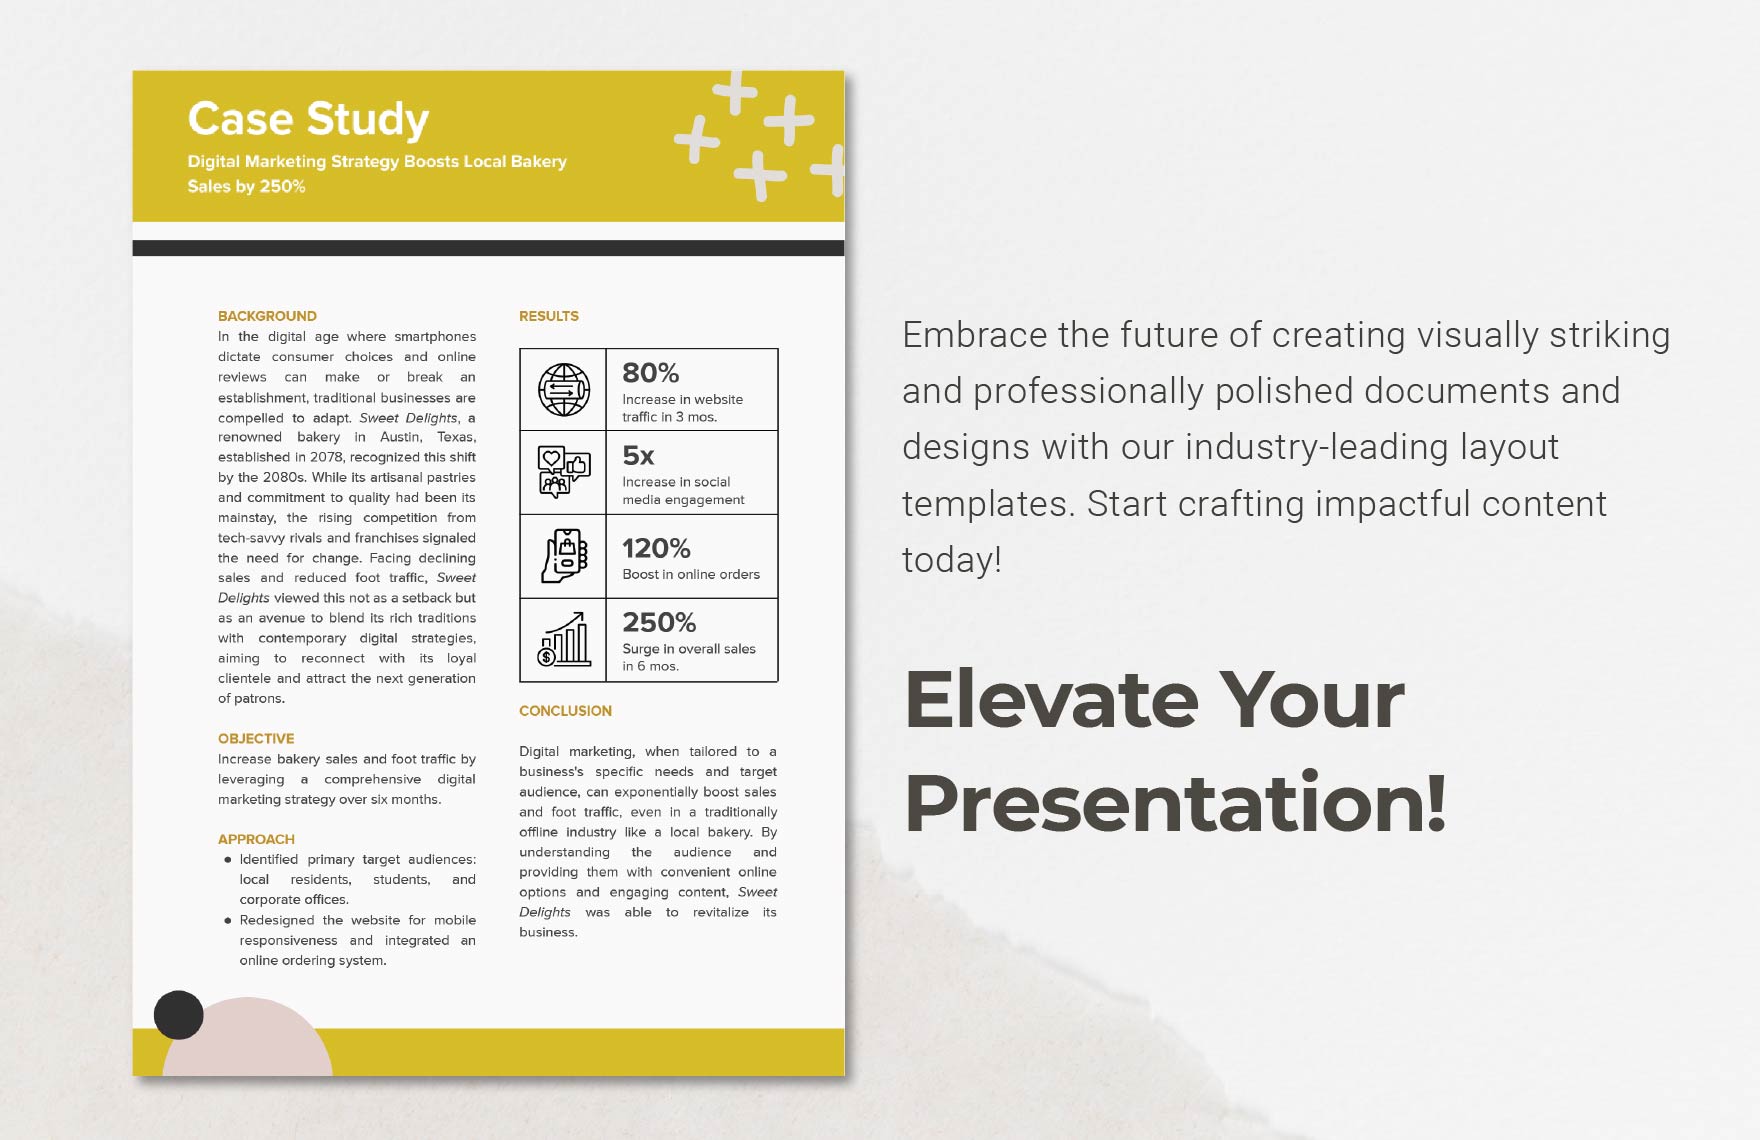 Case Study Layout Template